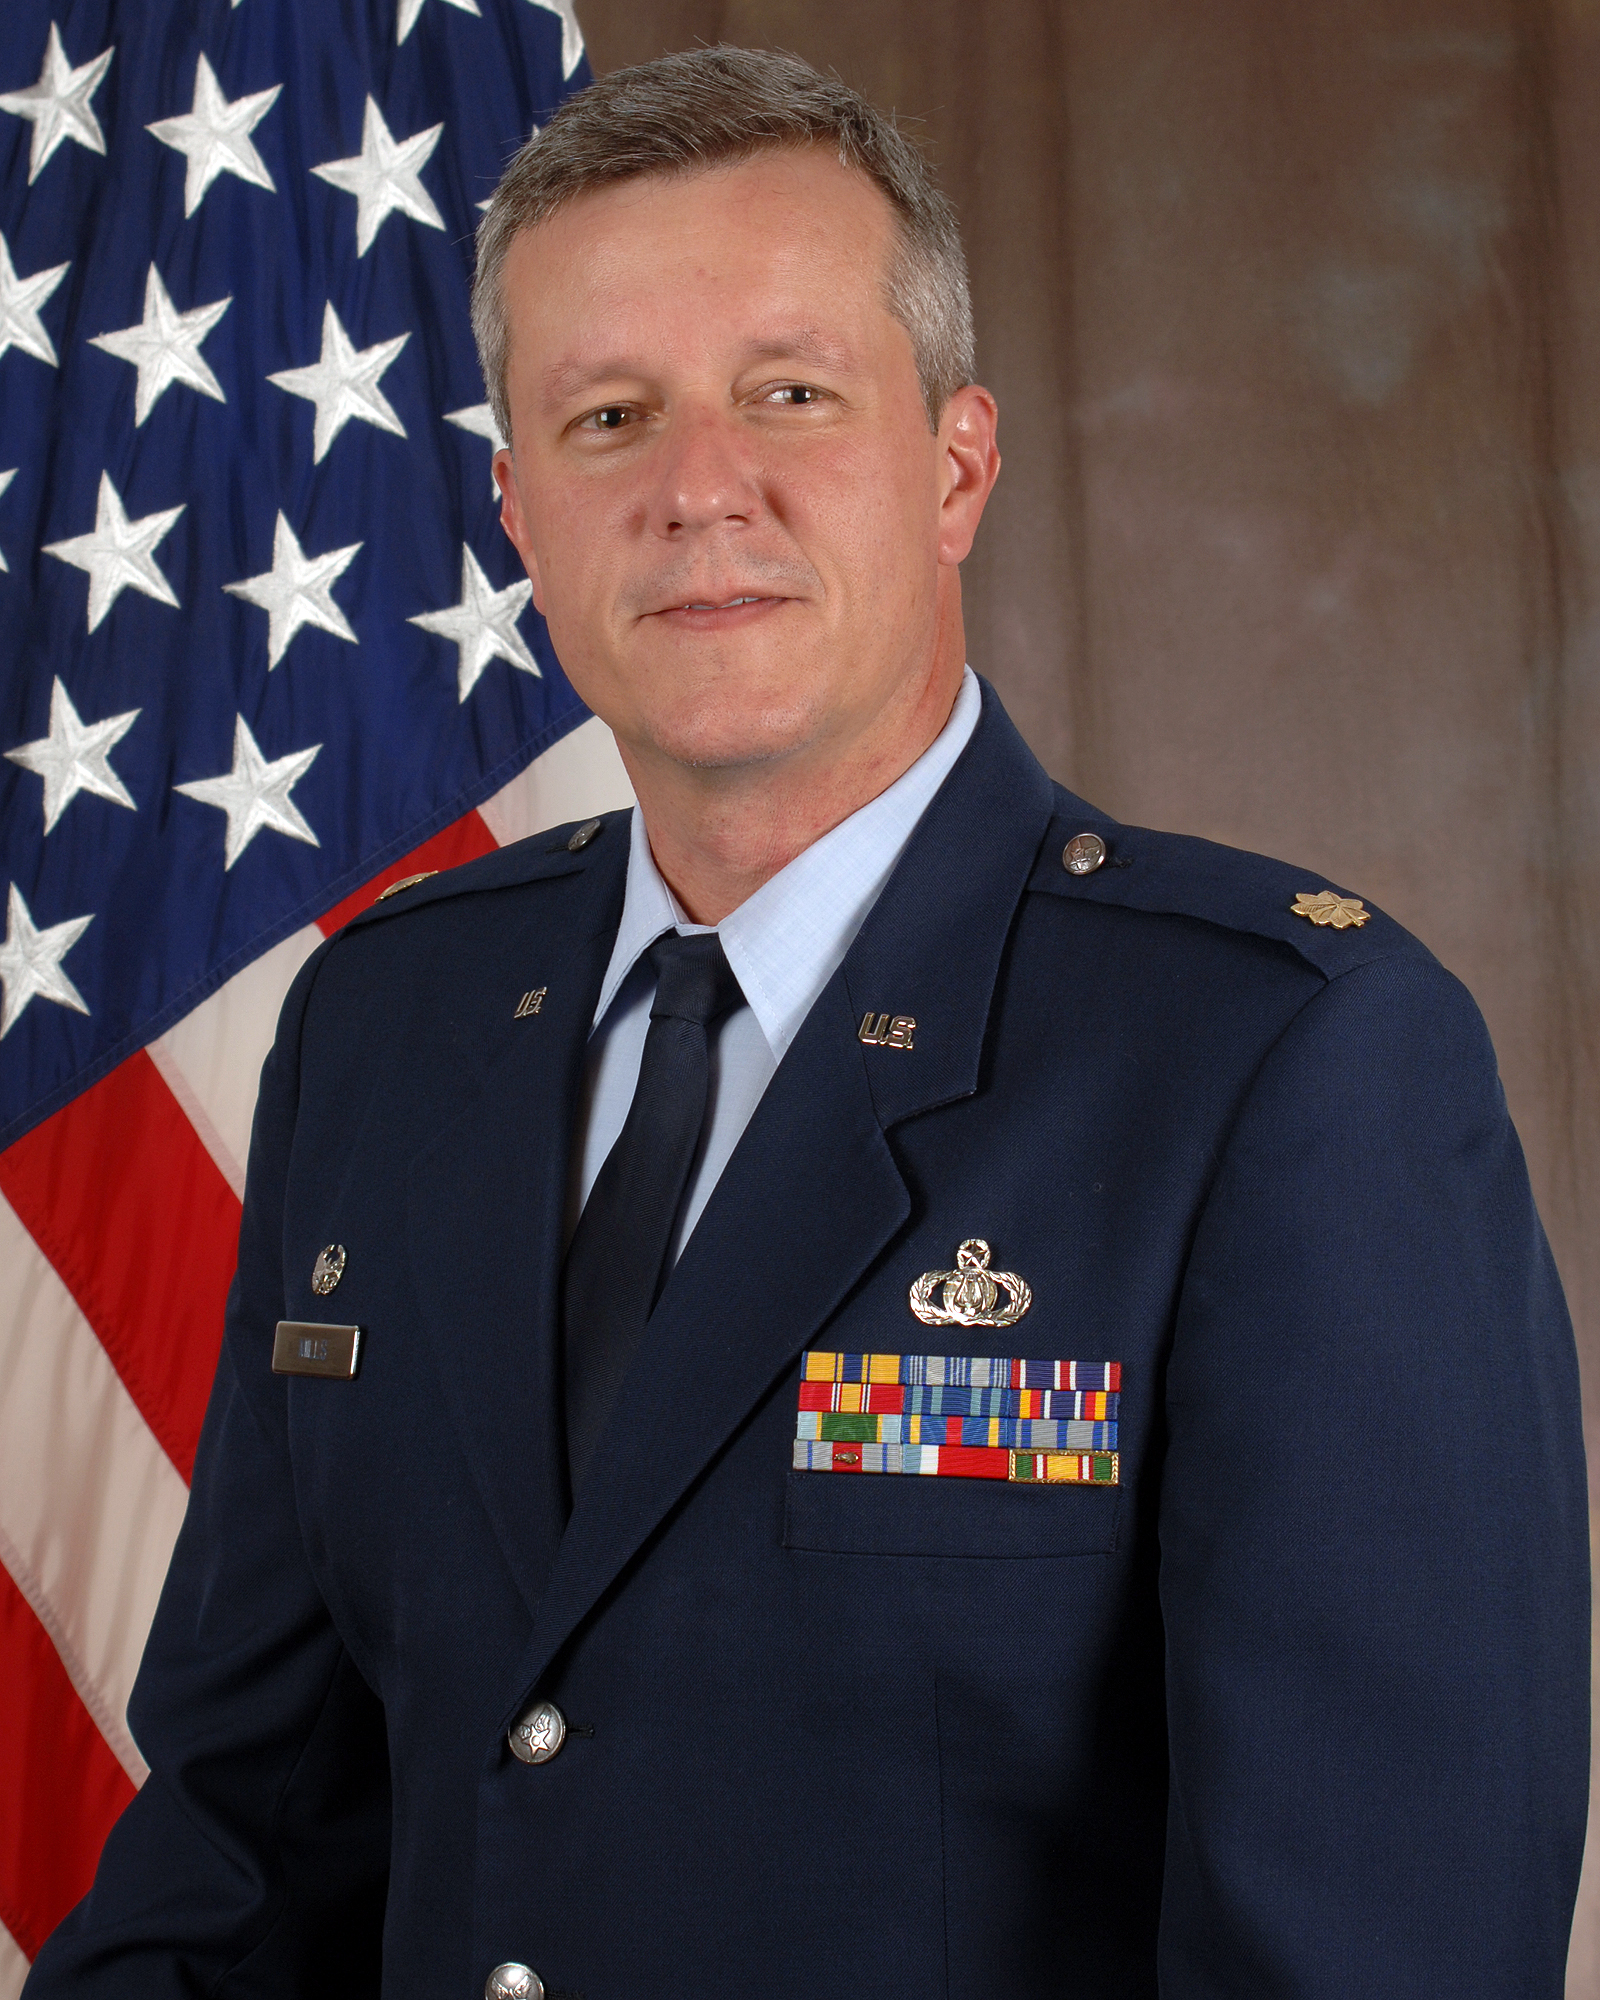 Lt. Col. Roger Mills, Commander and Conductor of the Air National Guard Band of the South